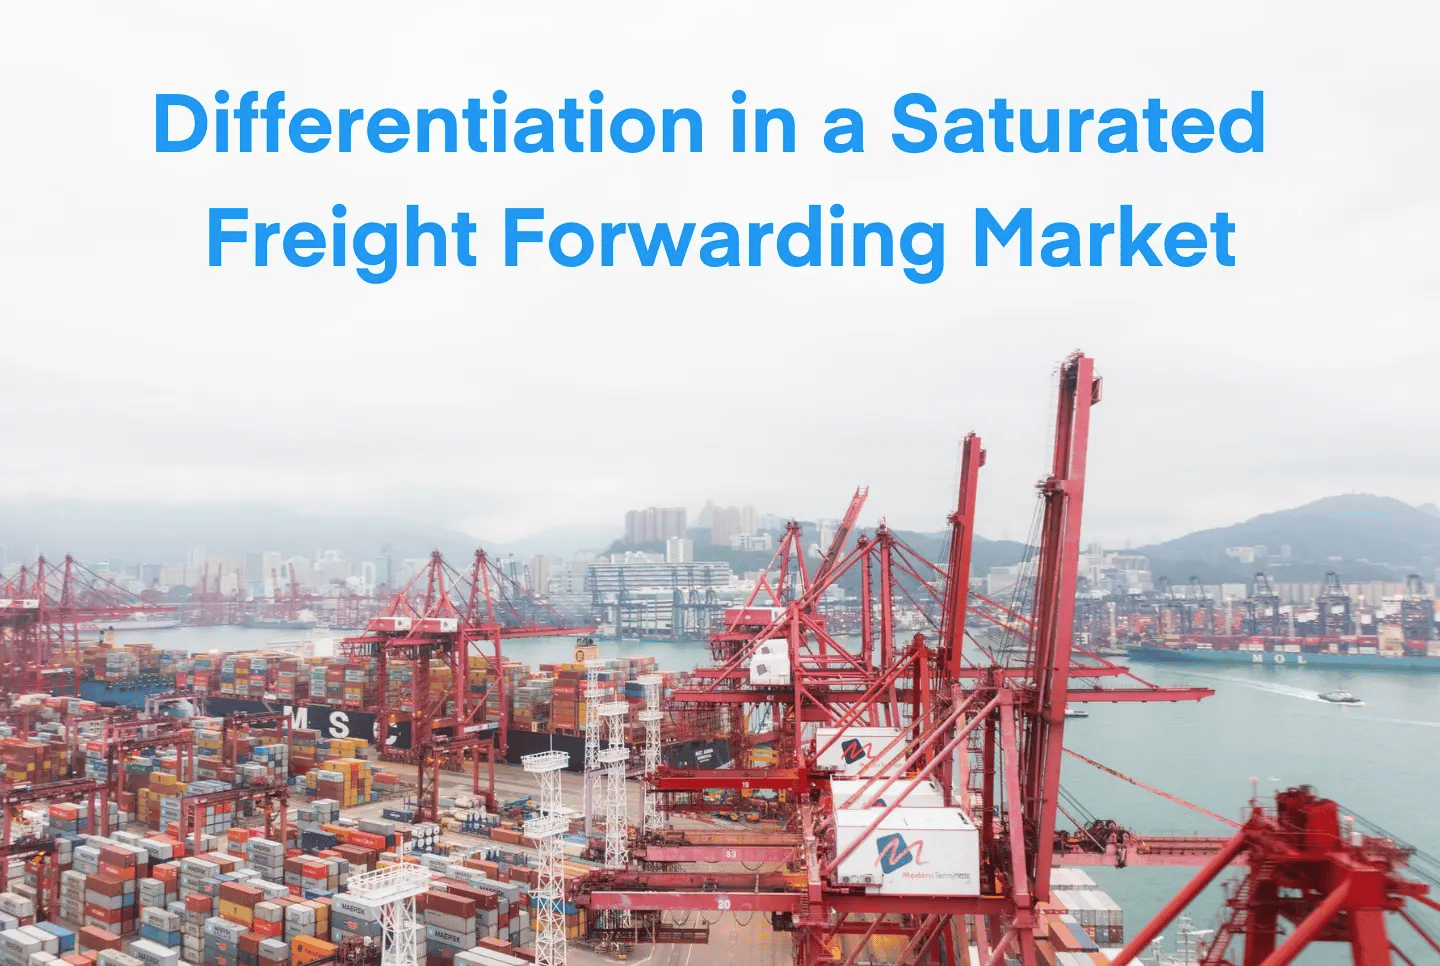 Busy port under the text "Differentiation in a saturated freight forwarding market"